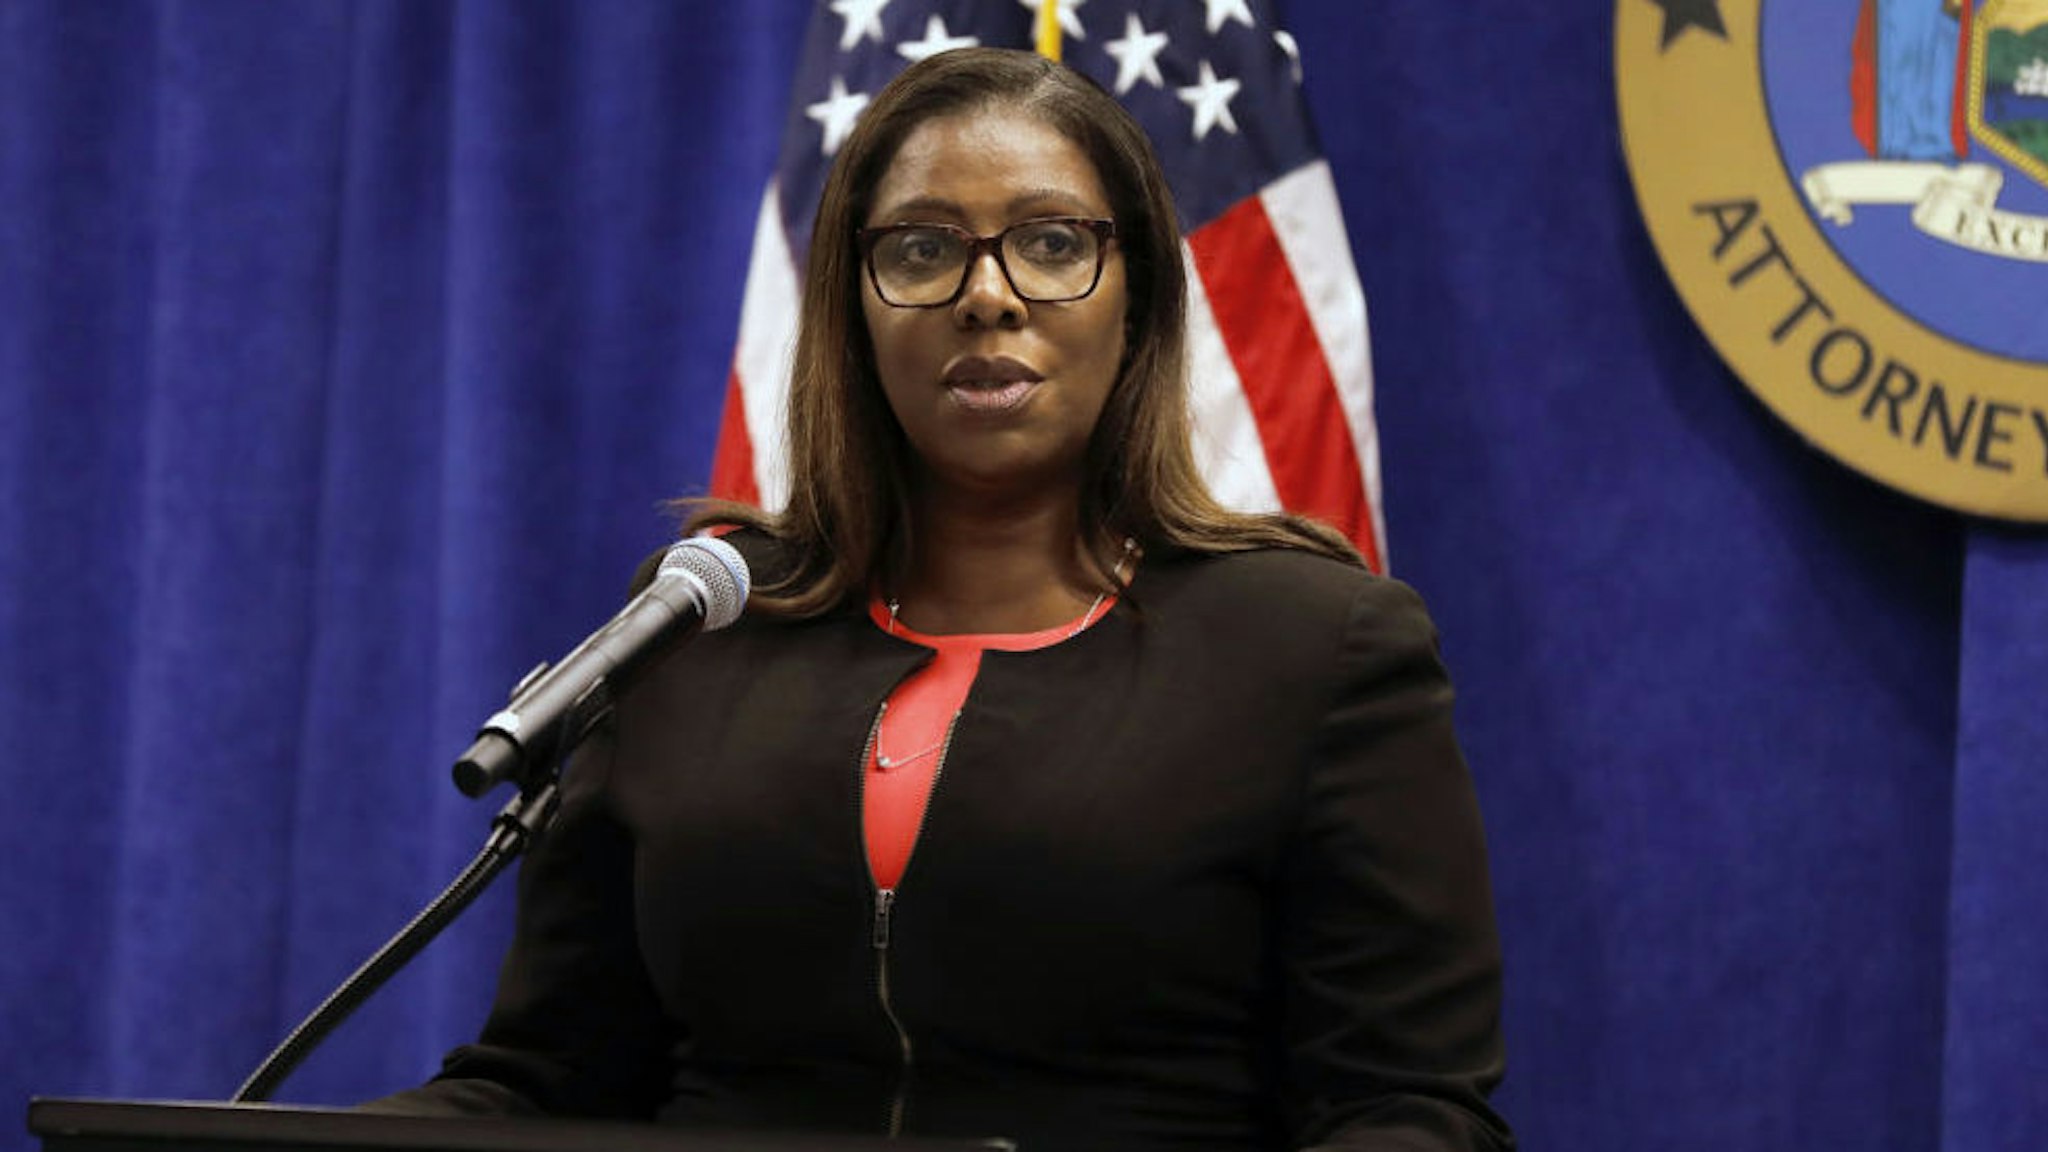 Letitia James, New York's attorney general, speaks during a news conference in New York, U.S., Thursday, Aug. 6, 2020. New York is seeking to dissolve the National Rifle Association as the state attorney general accused the gun rights group and its current and former senior officials of engaging in a massive fraud against donors.